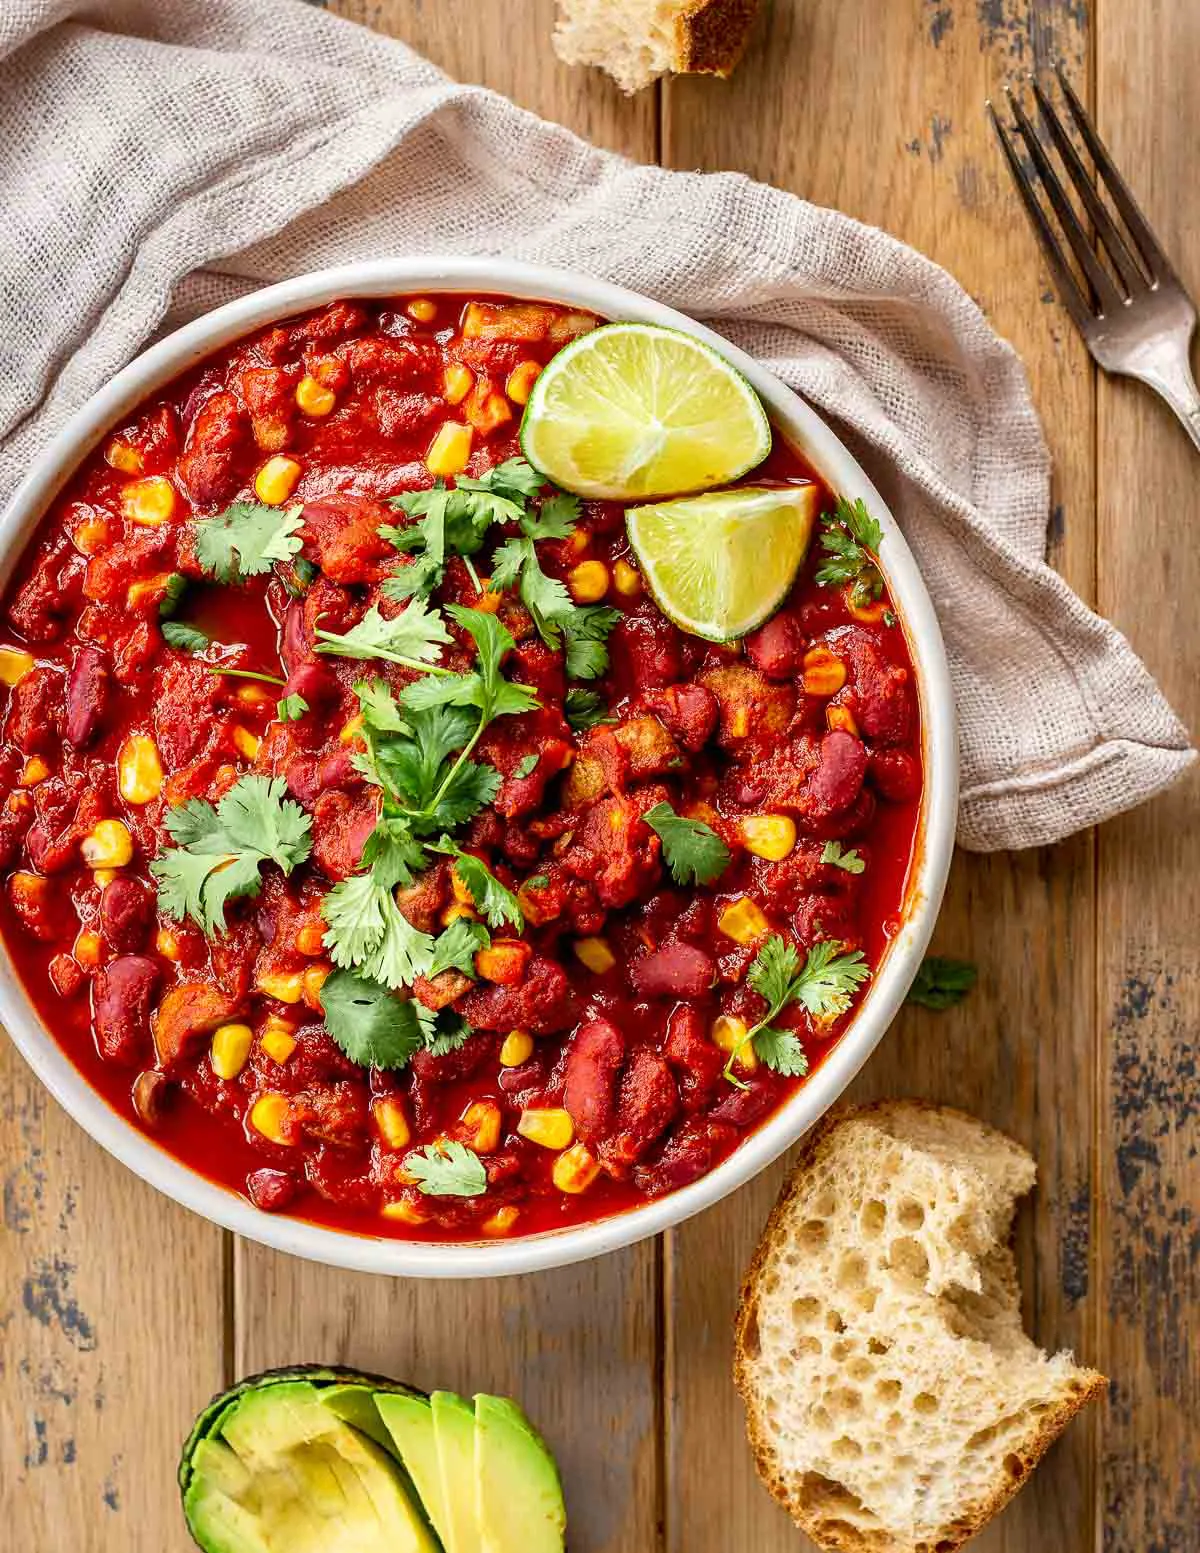 Quick Vegan Meals in 20 minutes ebook - Hearty Bean Chili